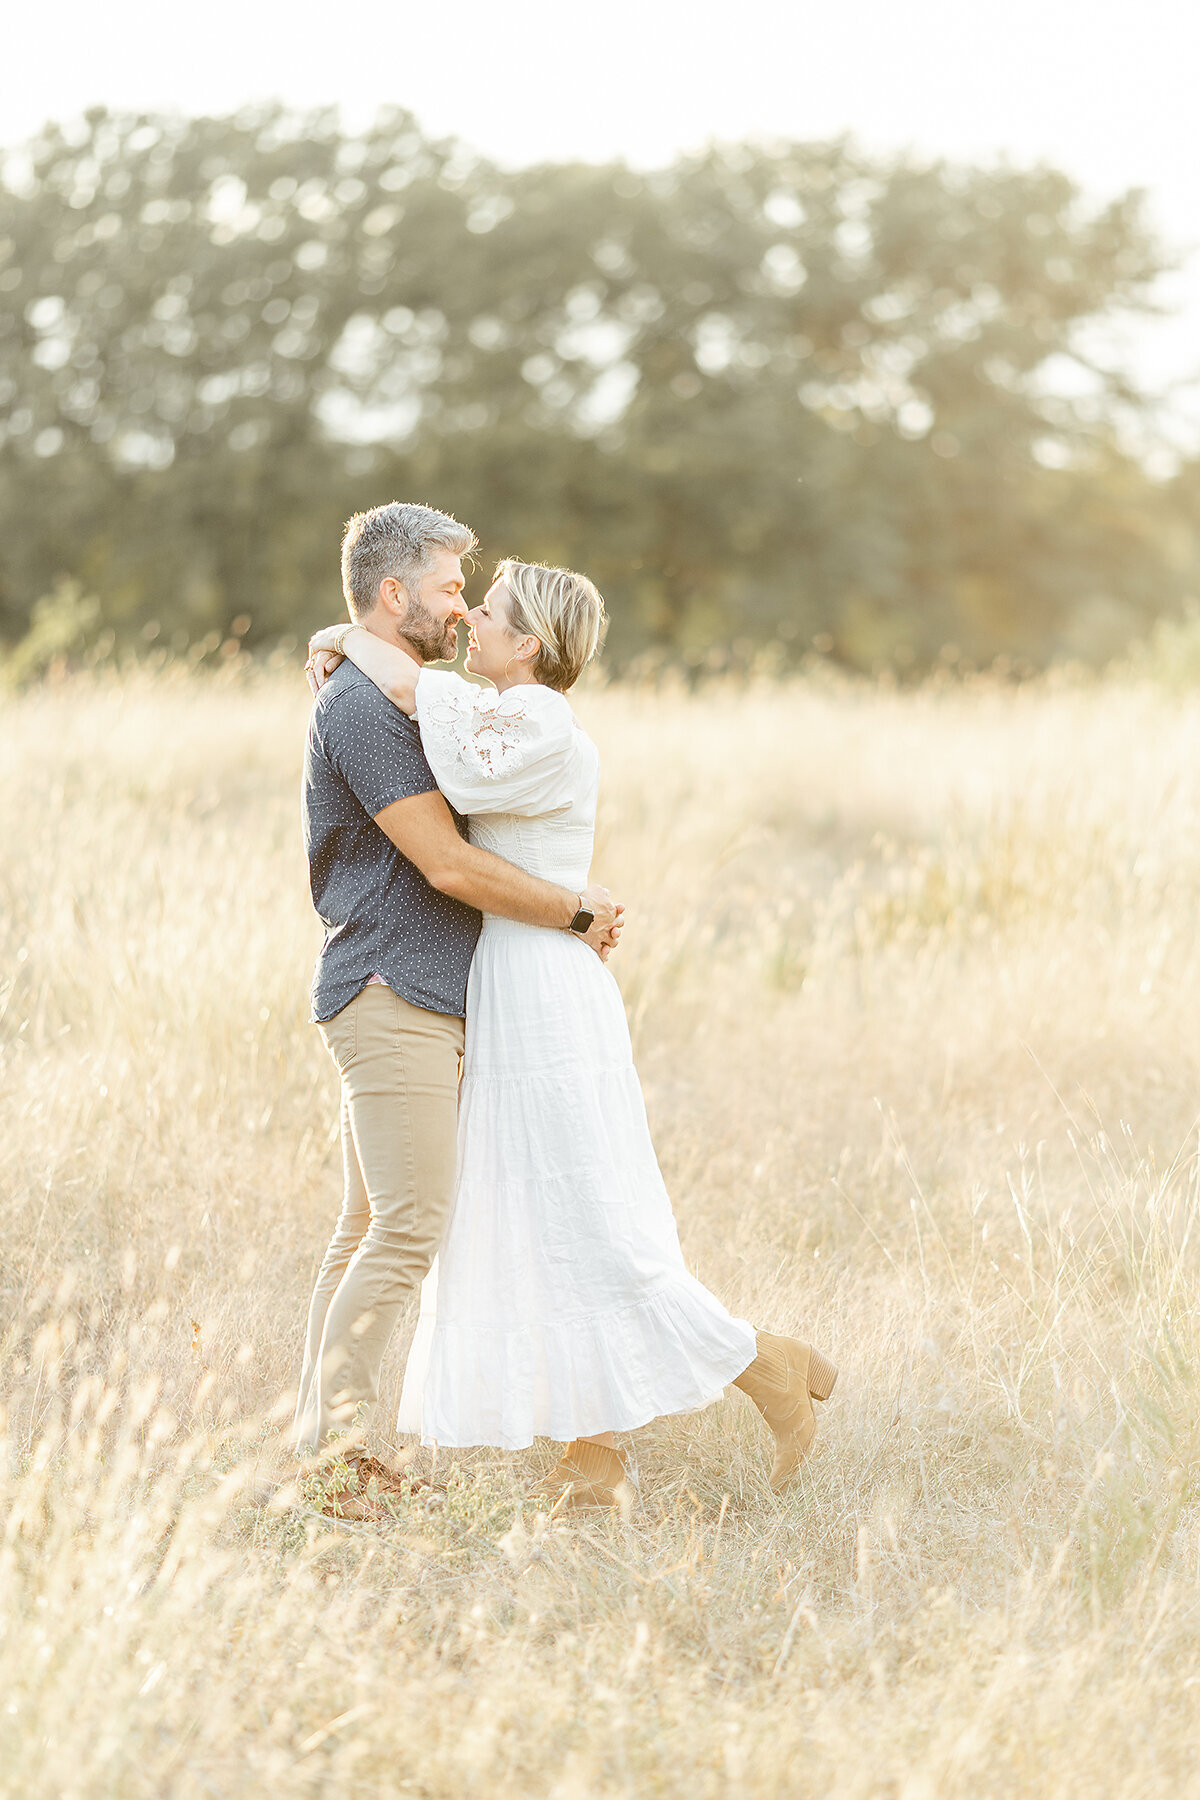 Photo of a mom and dad embracing each other in the middle of a grassy field at a local Fort Worth park for their family photos.